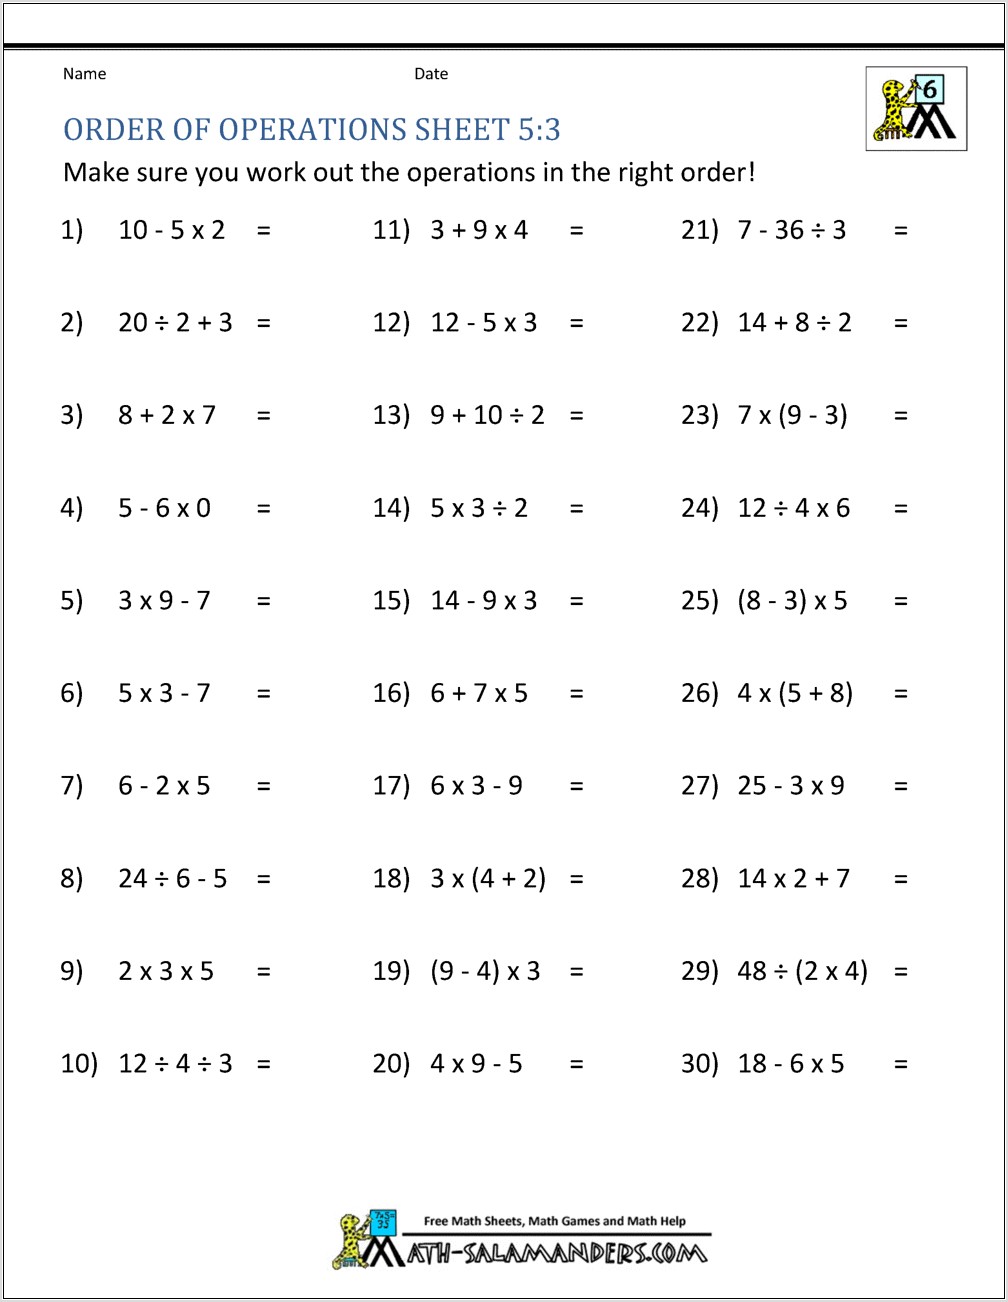 Solving Problems Using Order Of Operations Worksheet